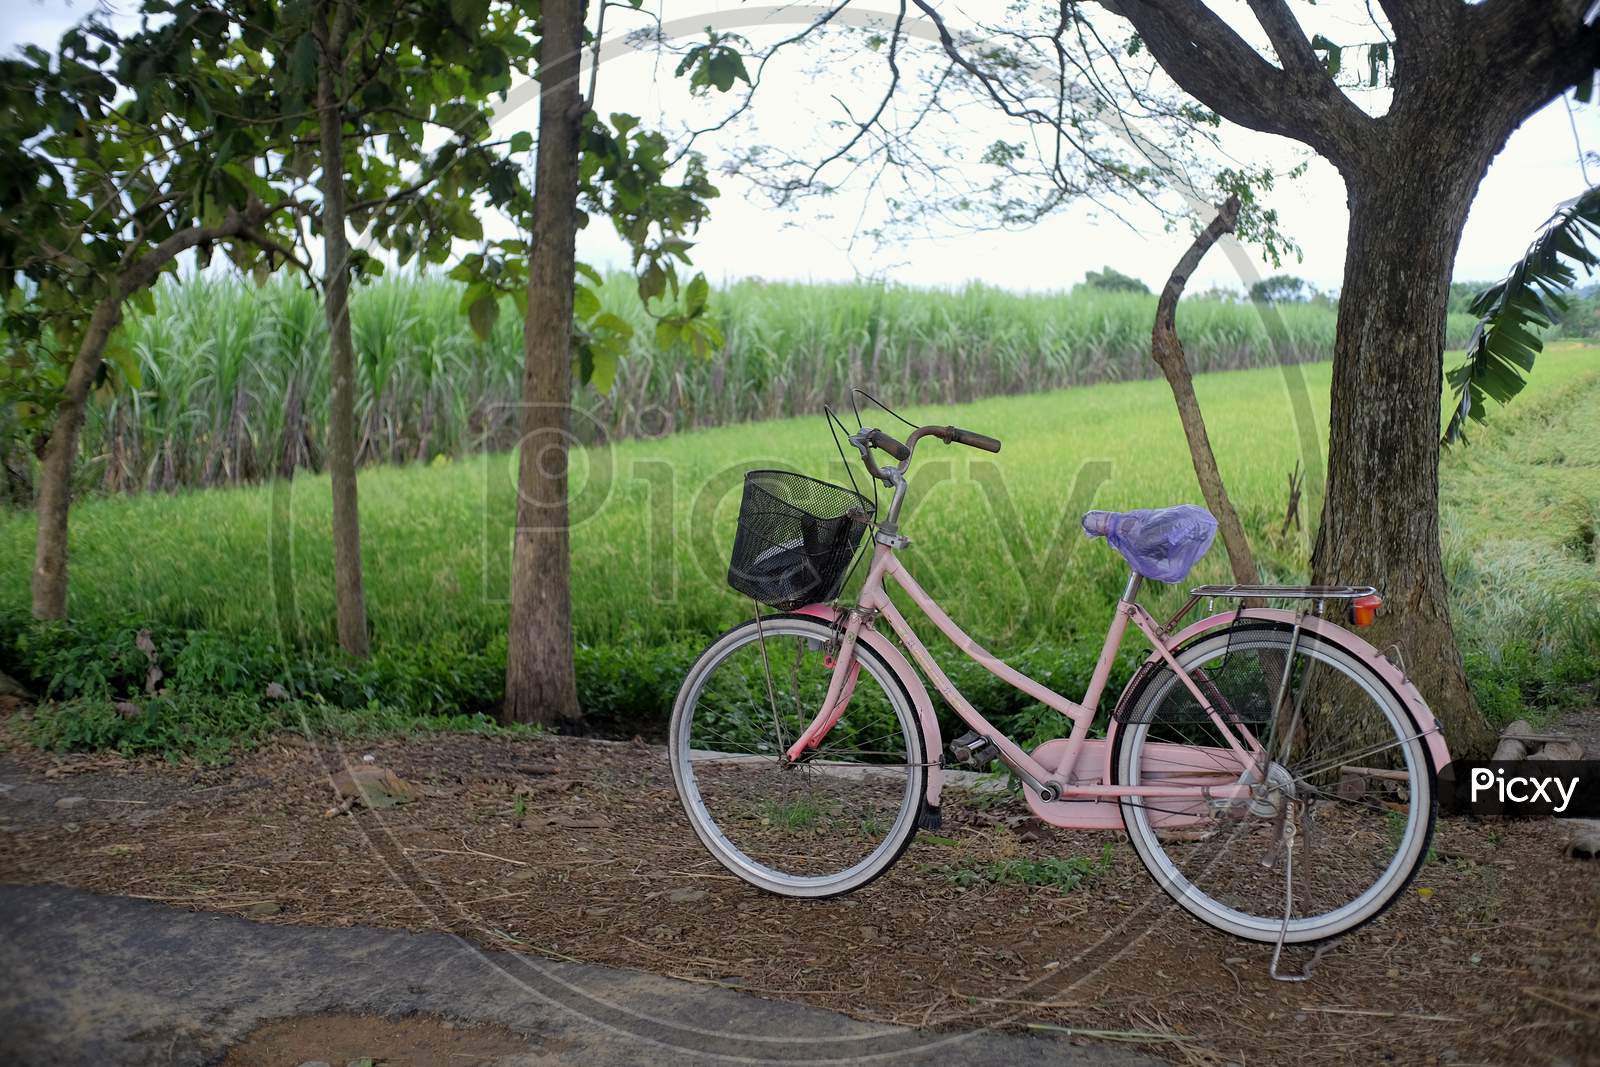 Feminine bikes are parked on rural road